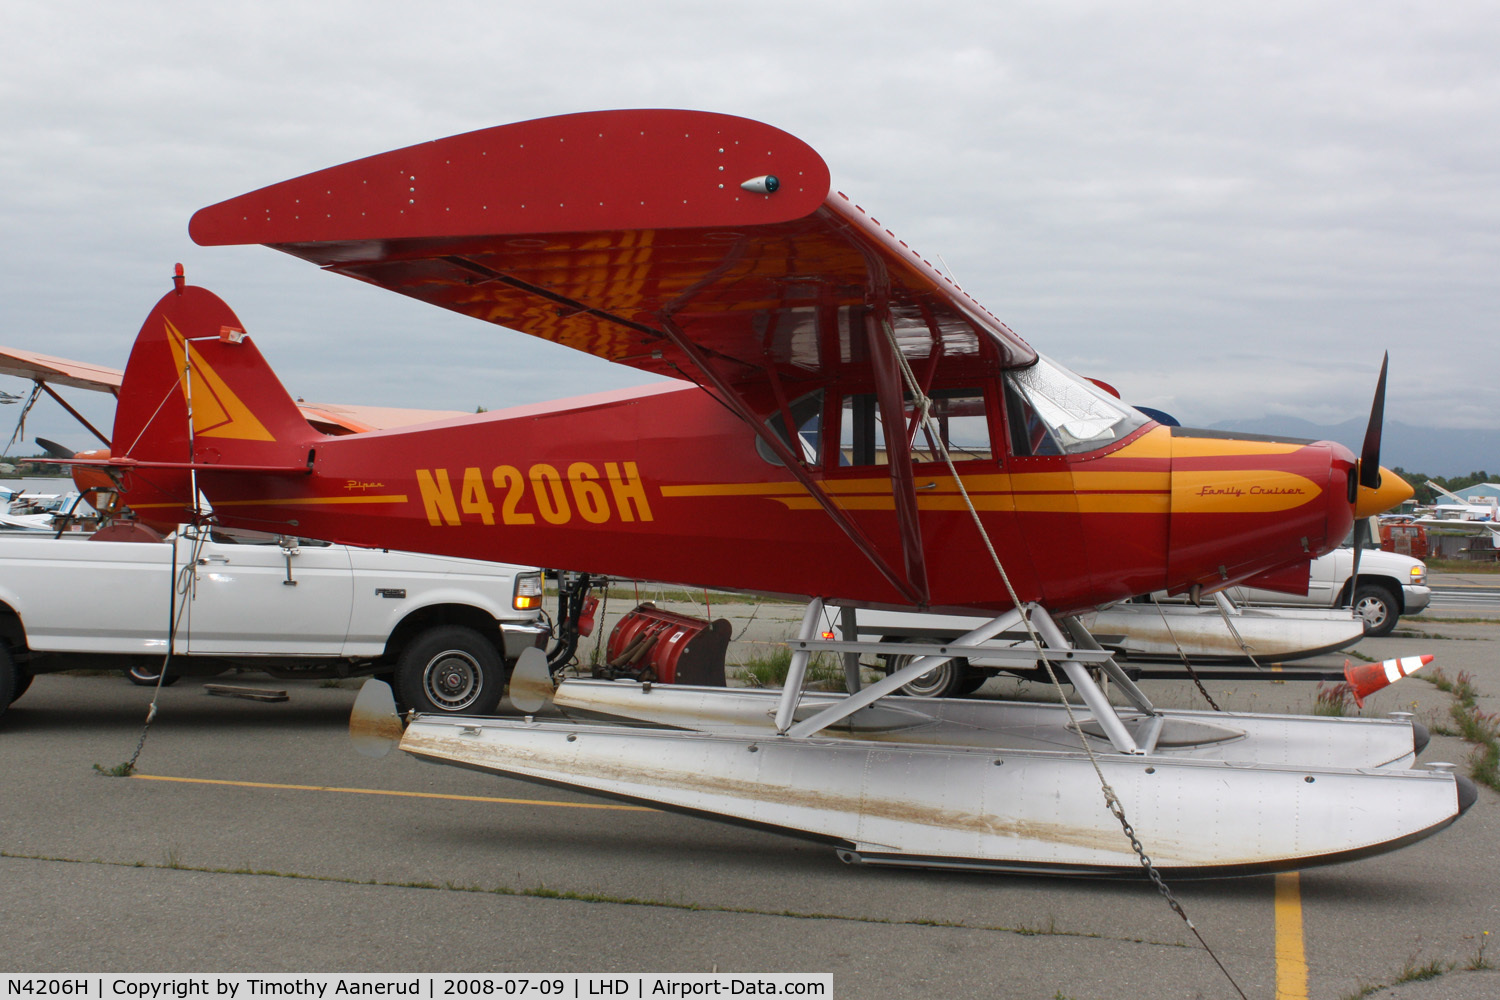 N4206H, 1948 Piper PA-14 Family Cruiser C/N 14-9, General Aviation parking area at Anchorage